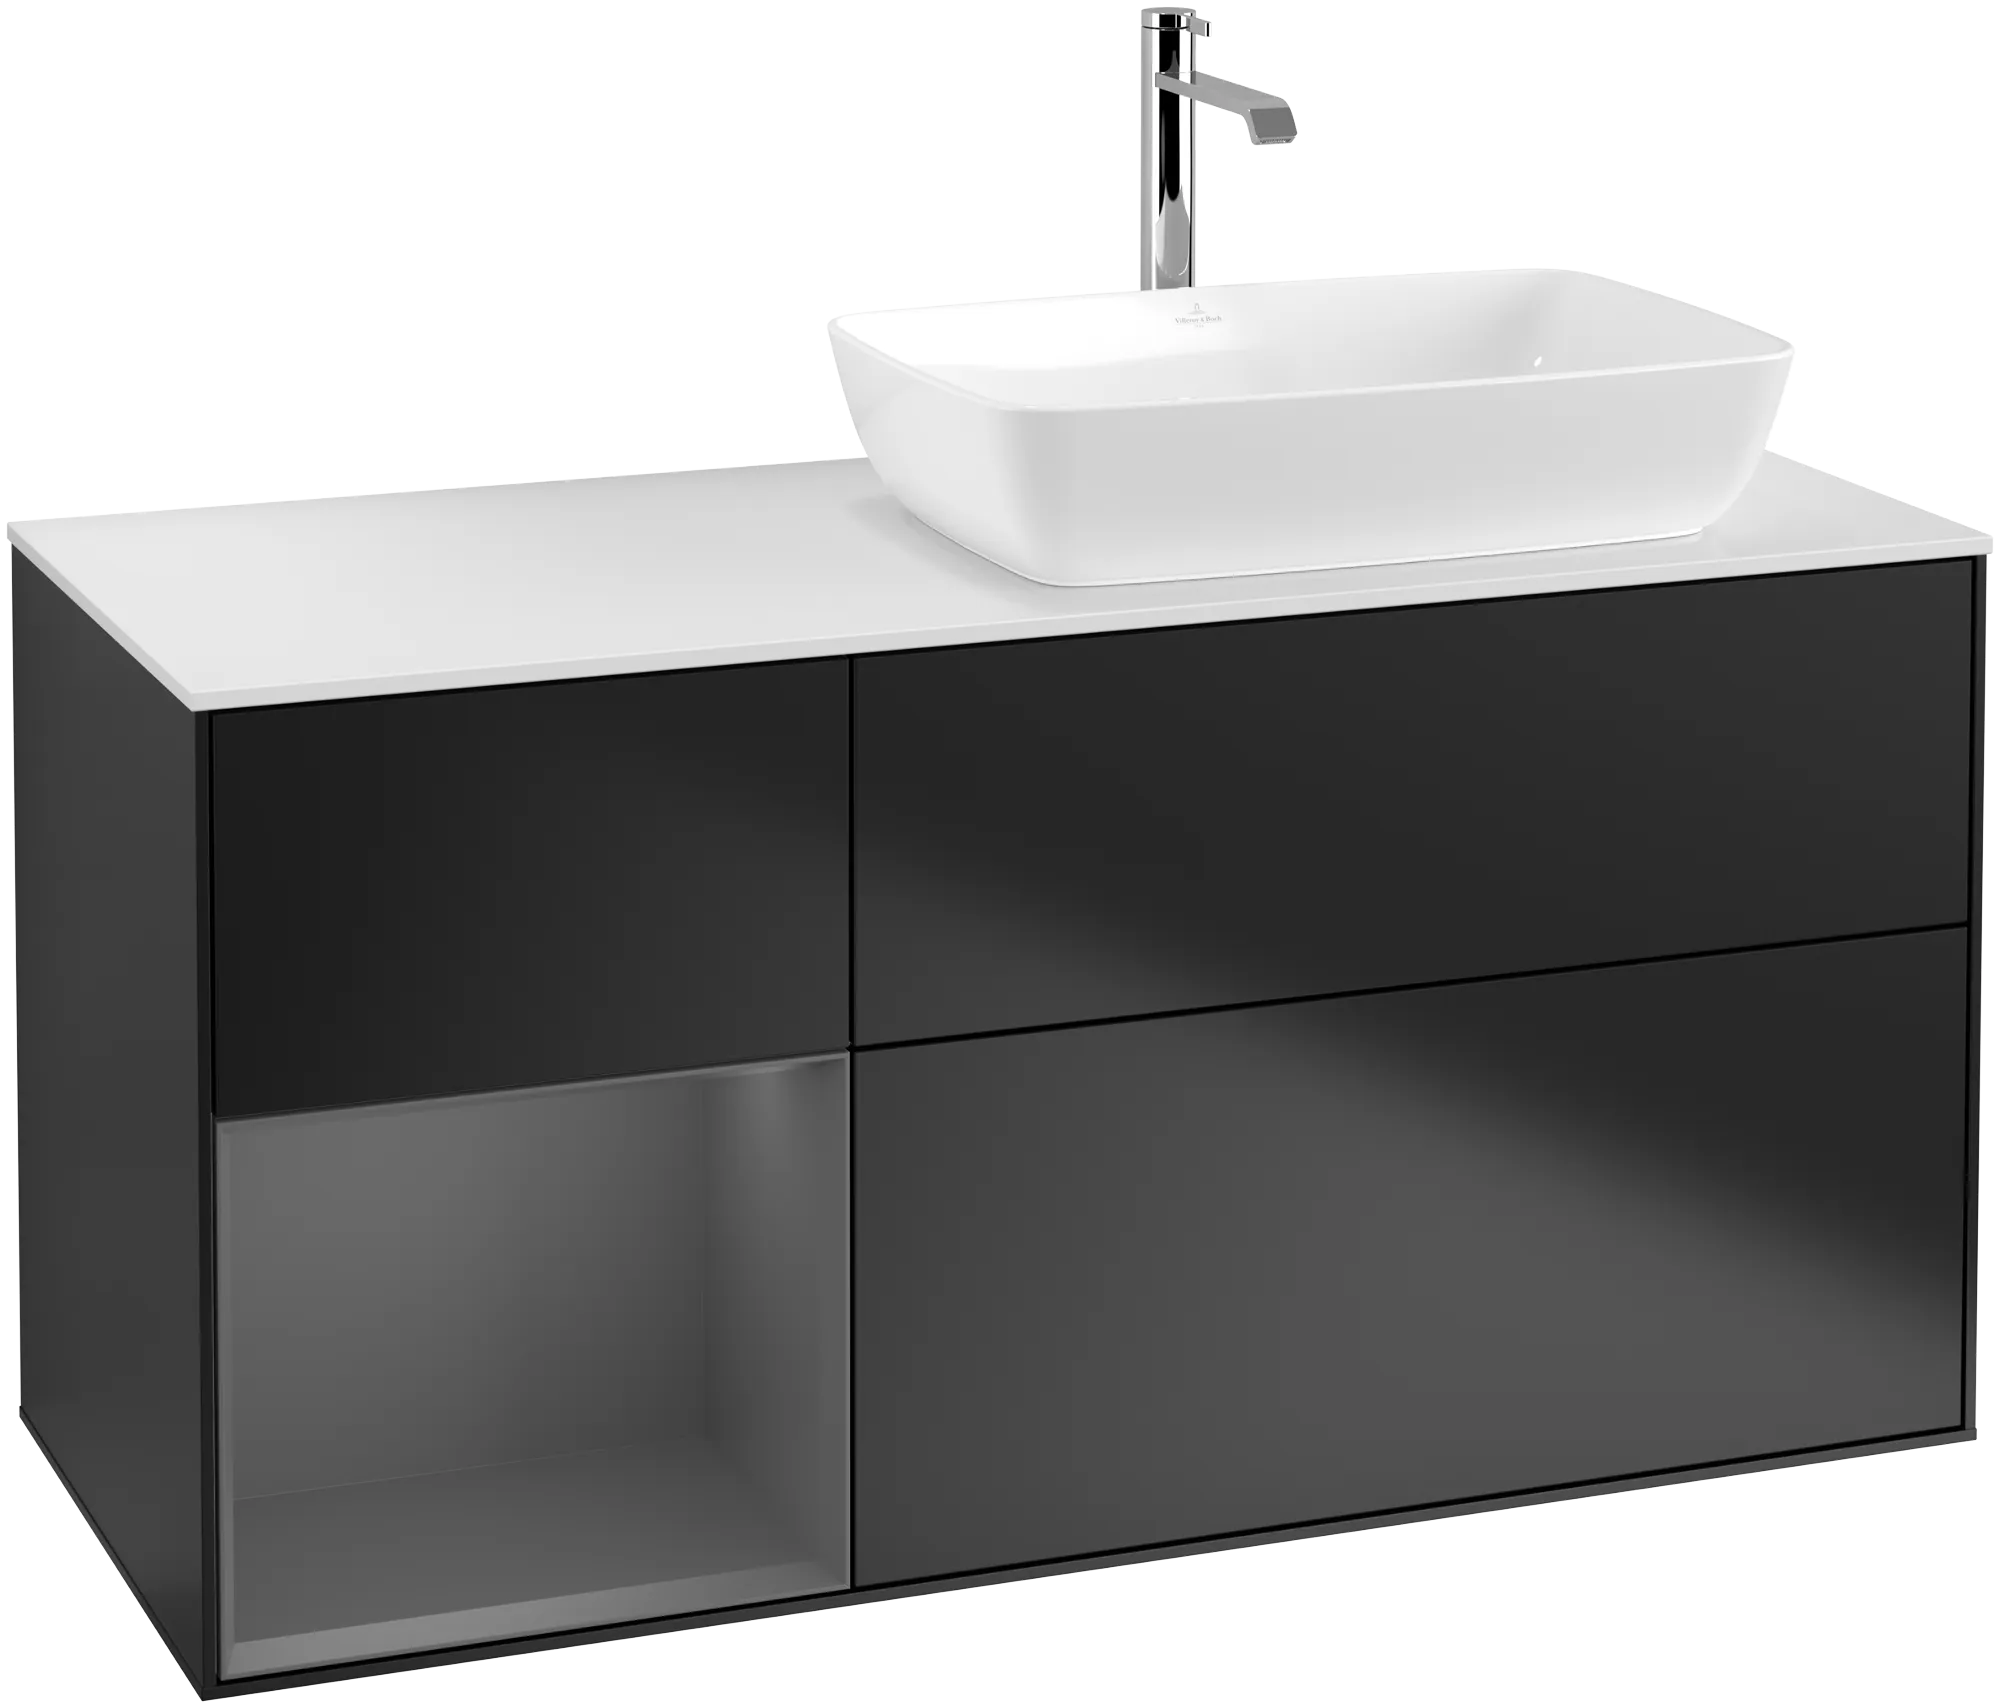 Obrázek VILLEROY BOCH Finion Vanity unit, with lighting, 3 pull-out compartments, 1200 x 603 x 501 mm, Black Matt Lacquer / Anthracite Matt Lacquer / Glass White Matt #G801GKPD